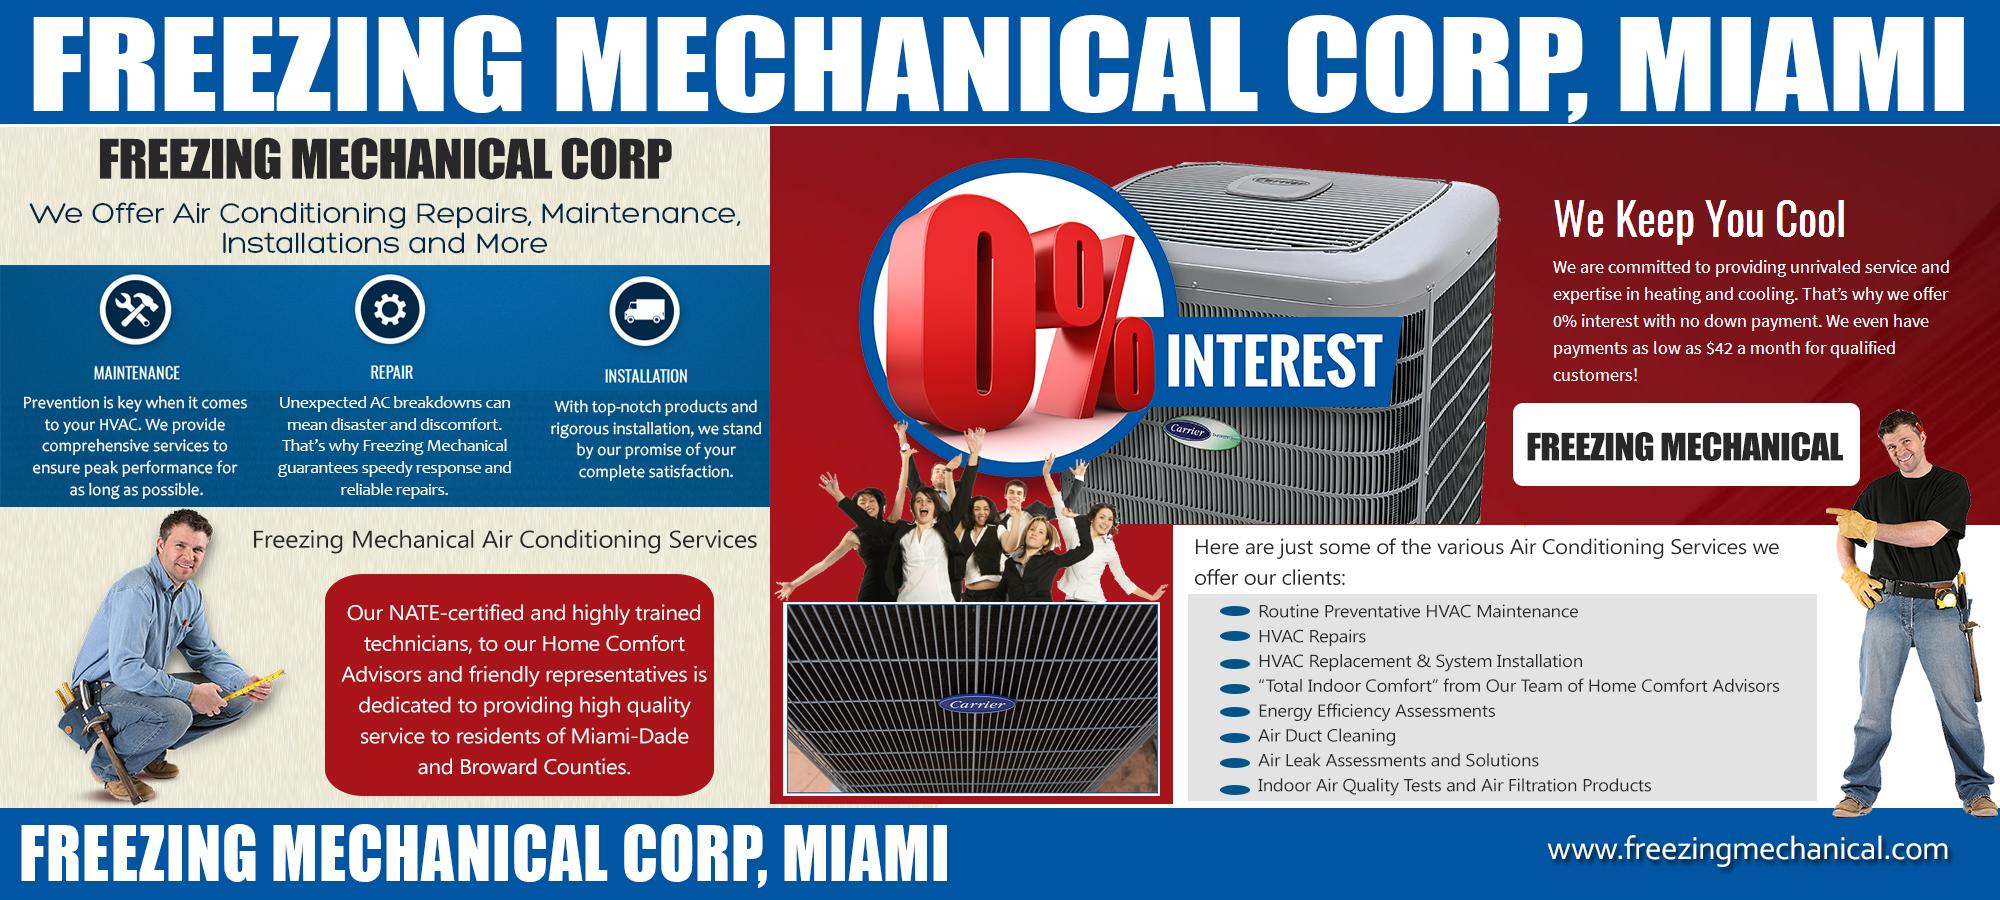 Freezing Mechanical Air Conditioning Services   